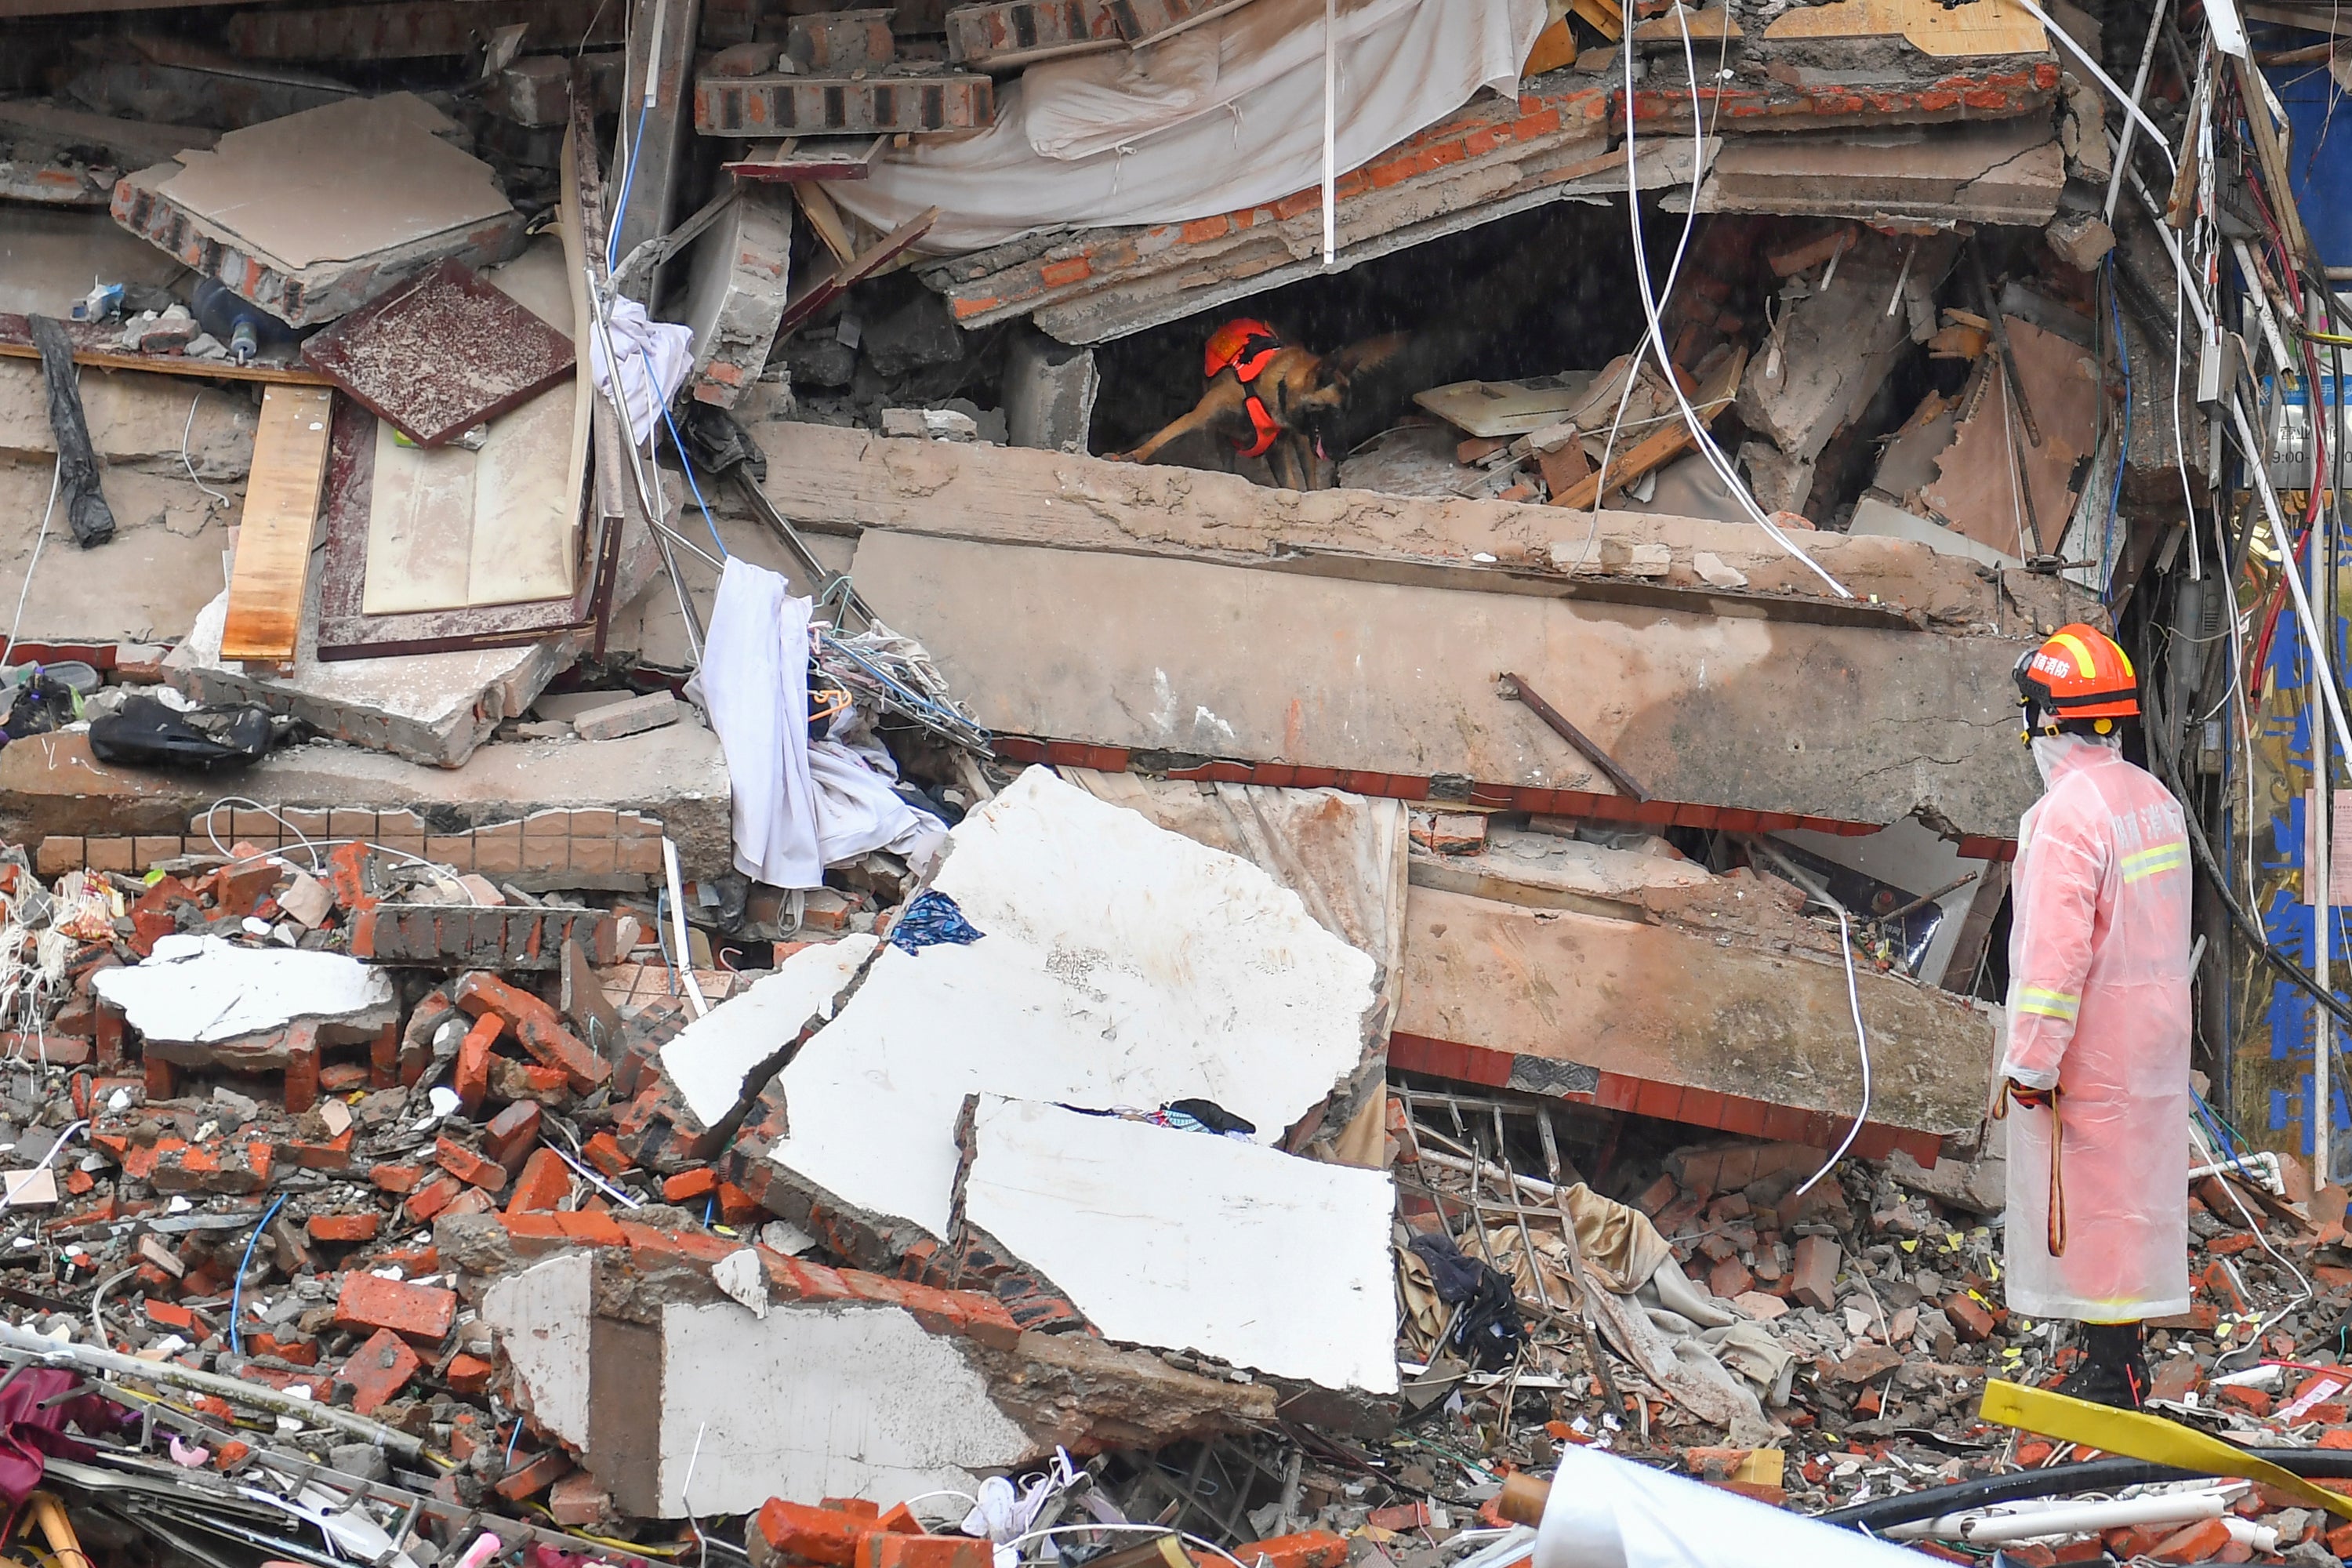 A rescuer works with a rescue dog at the collapse site of a self-constructed residential building